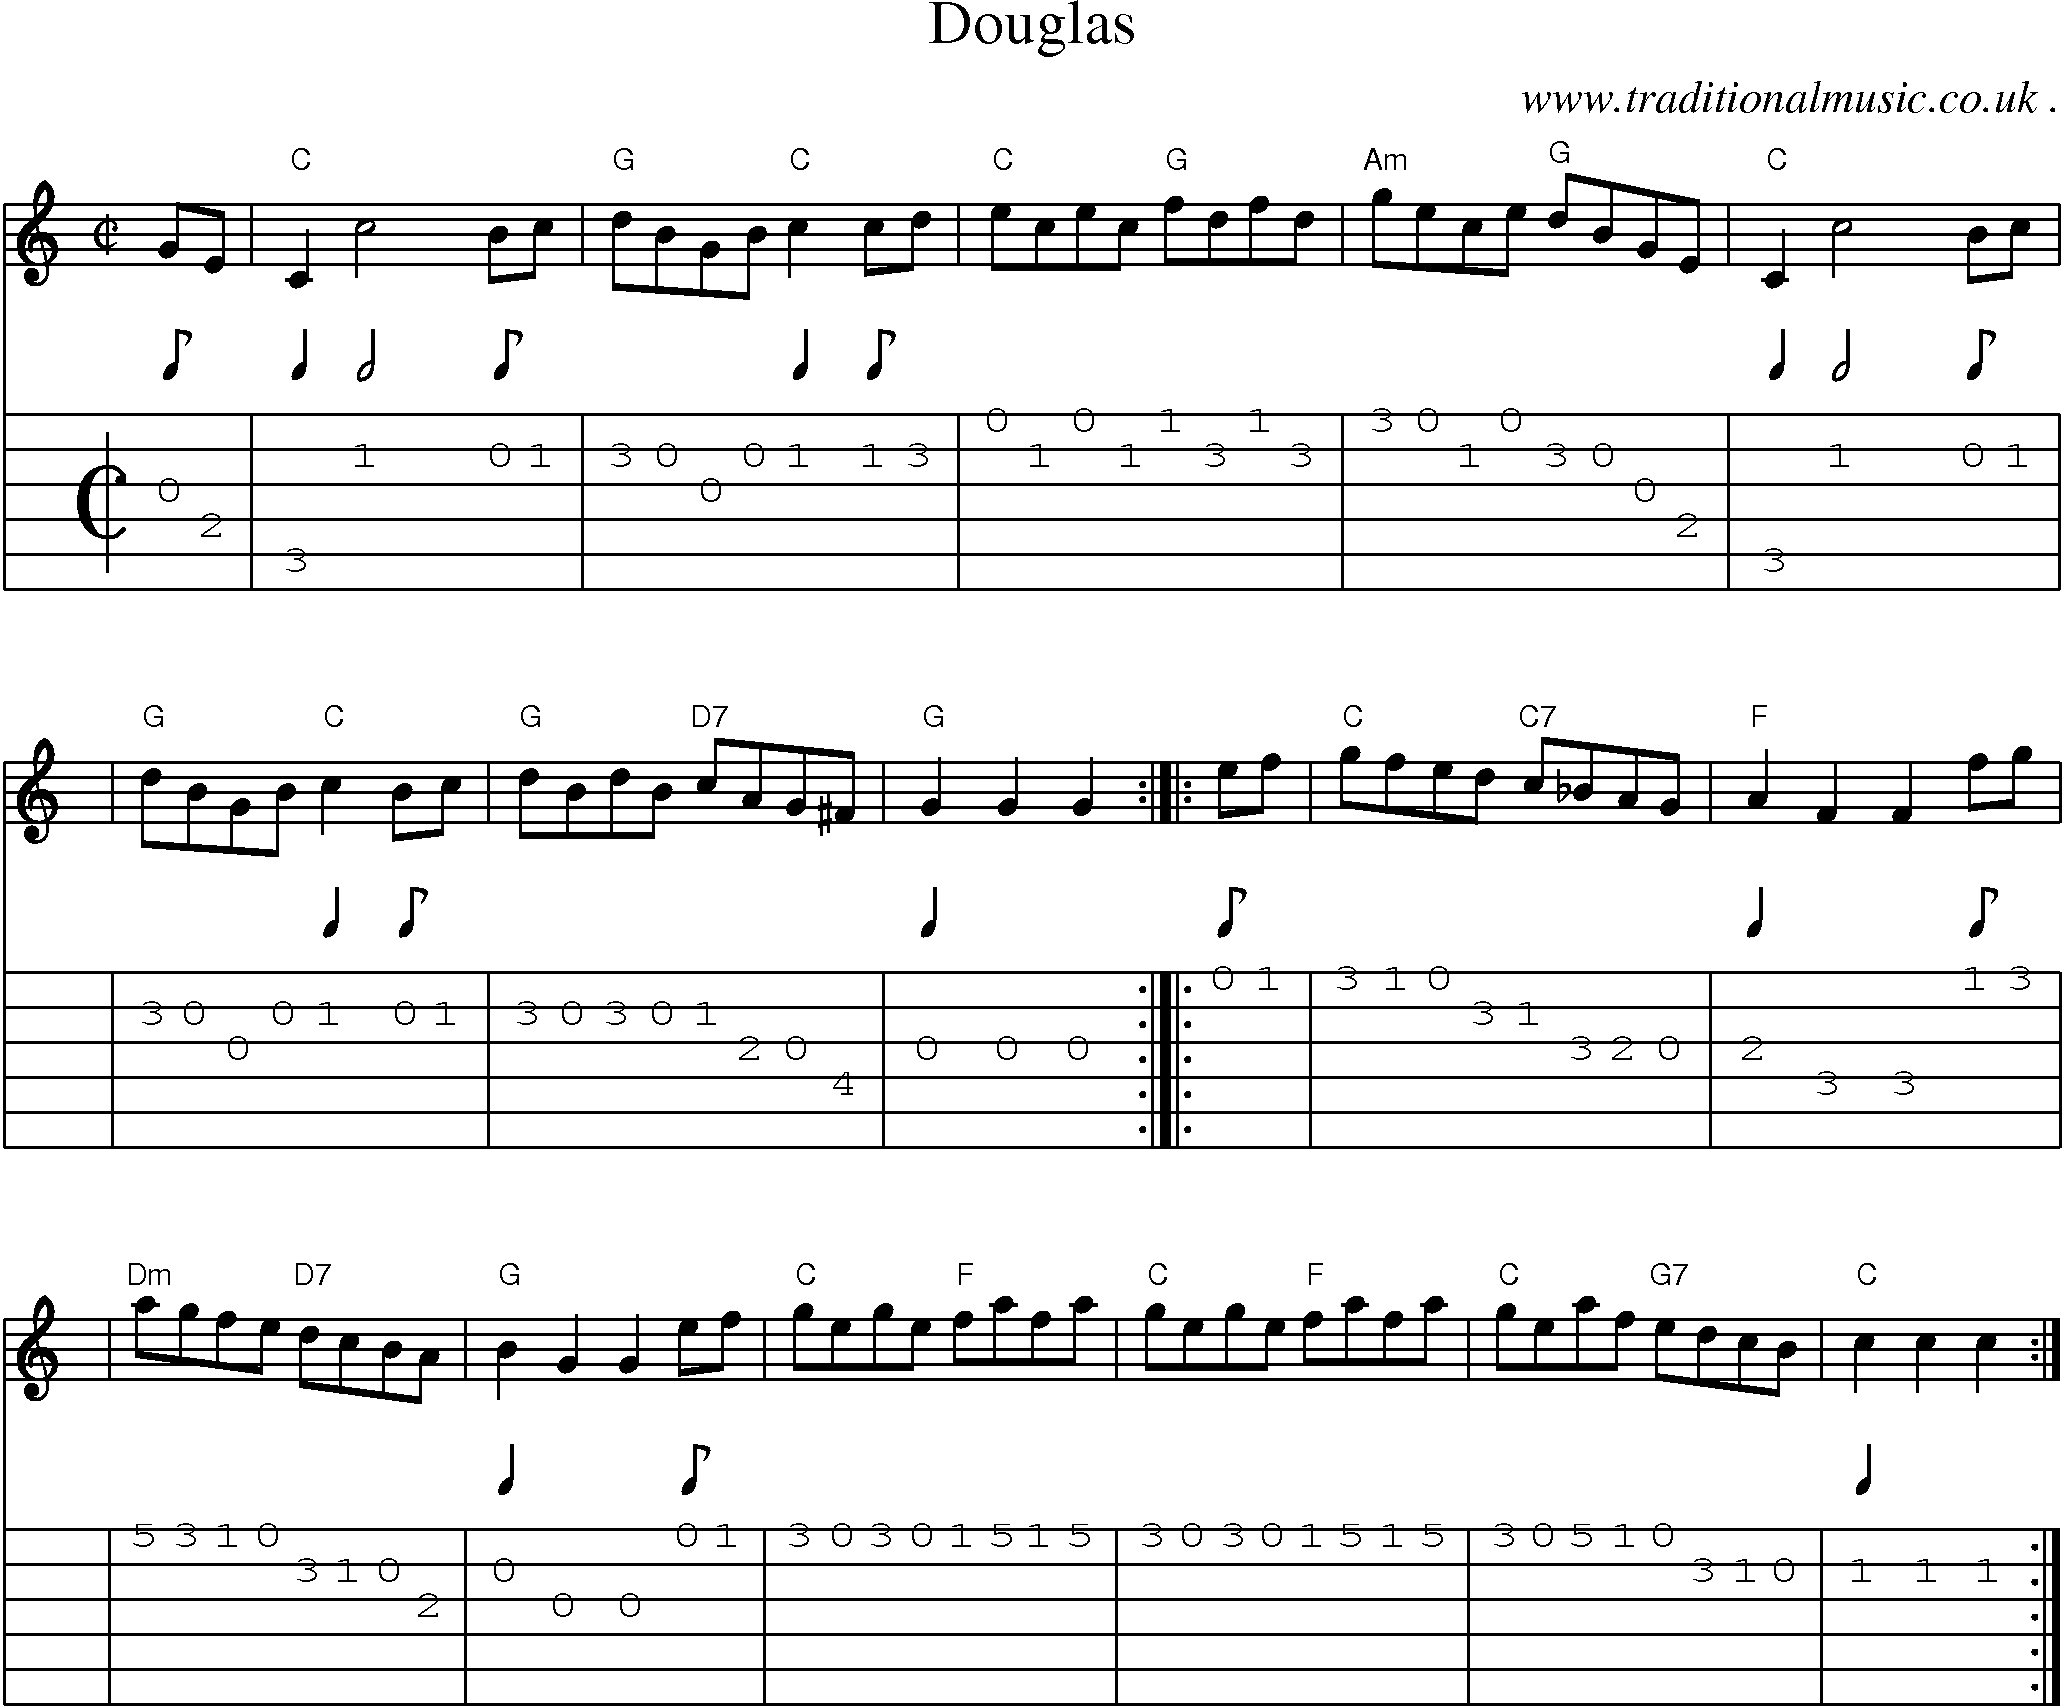 Sheet-music  score, Chords and Guitar Tabs for Douglas